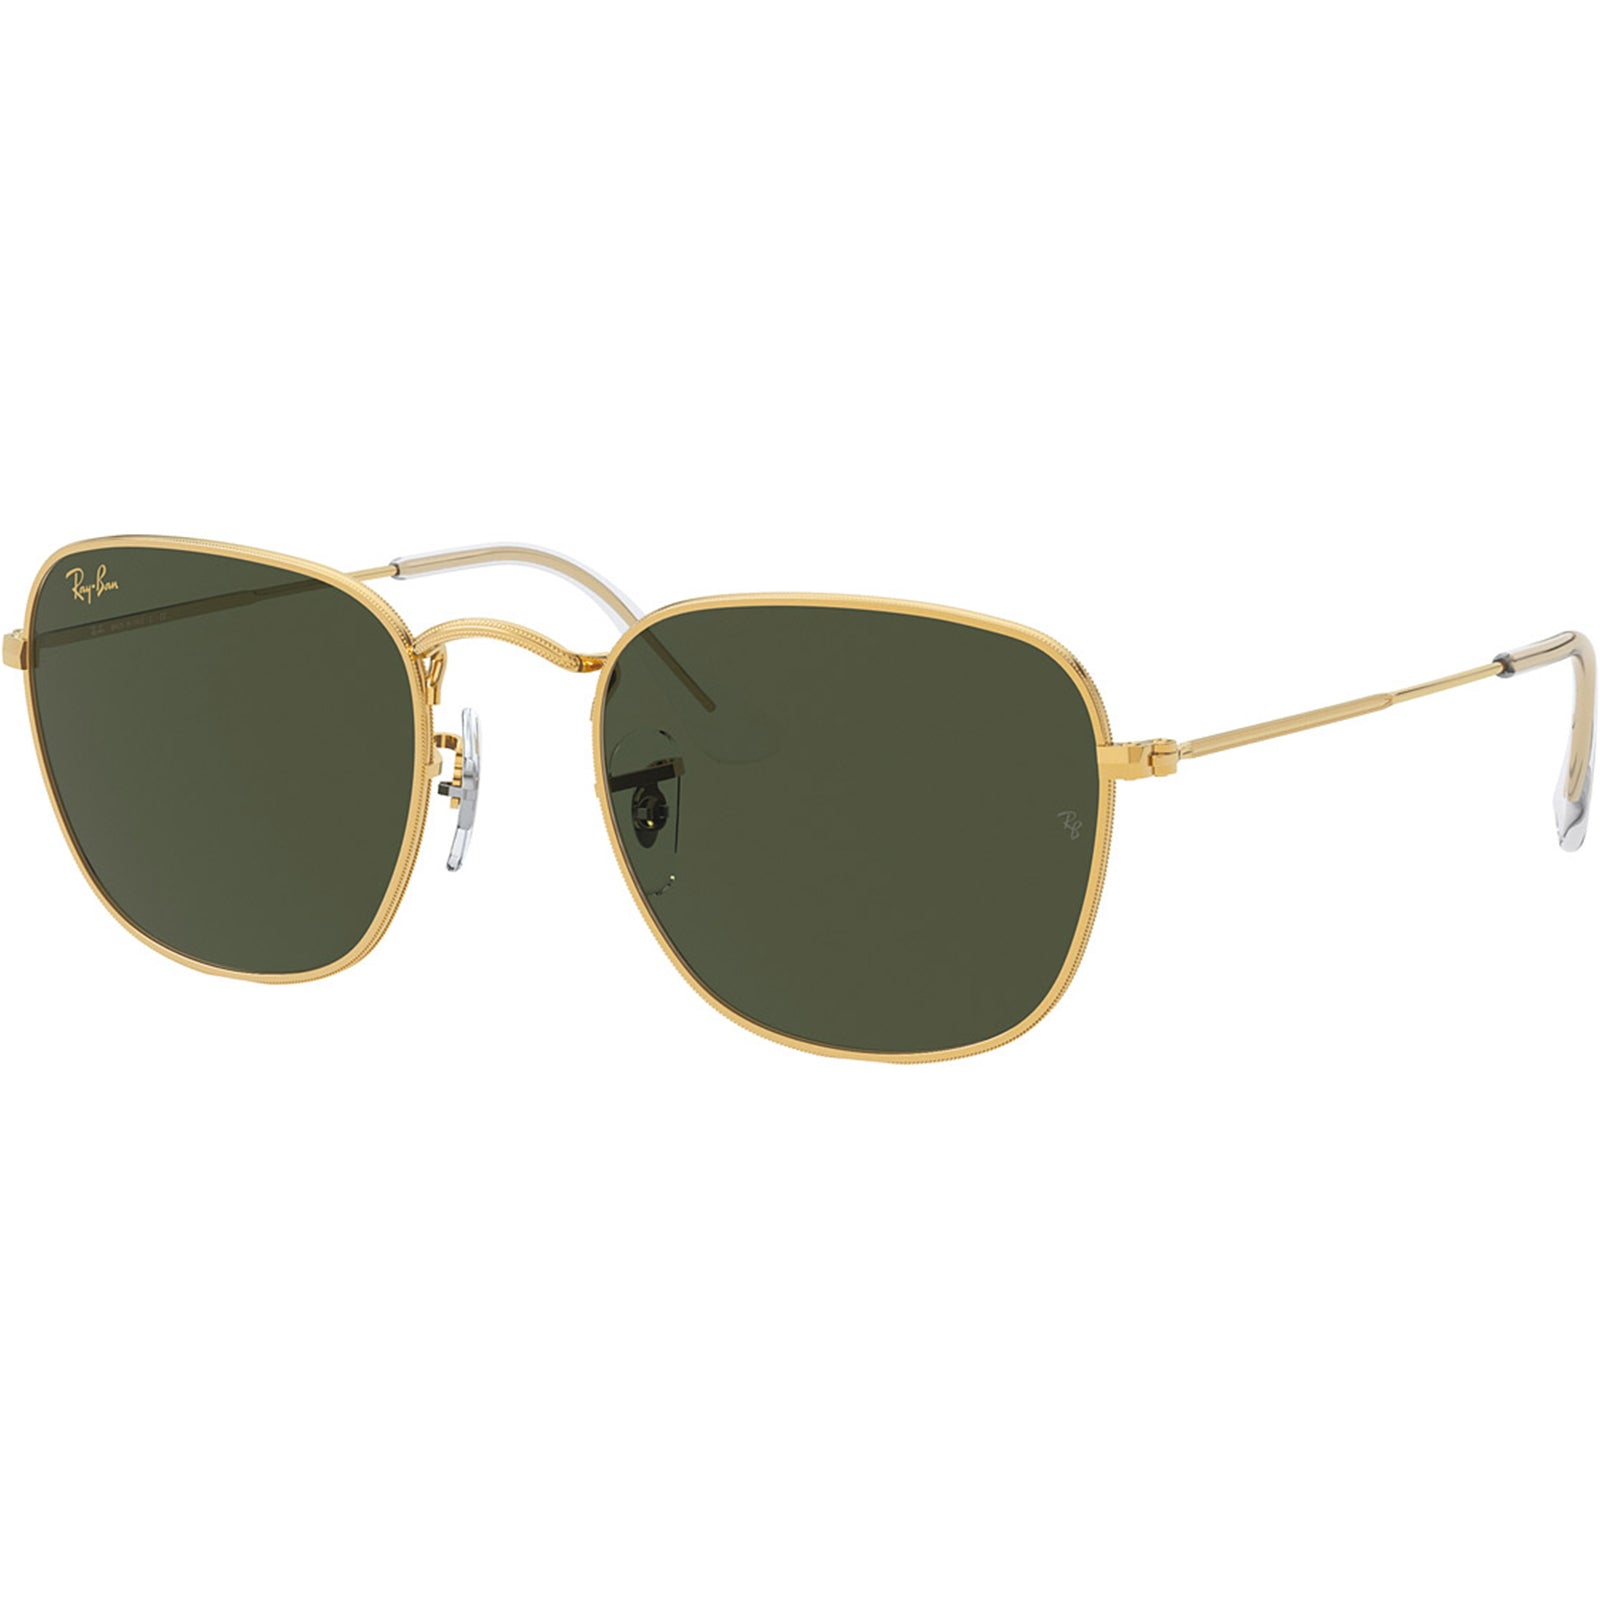 Ray-Ban Frank Adult Lifestyle Sunglasses-0RB3857